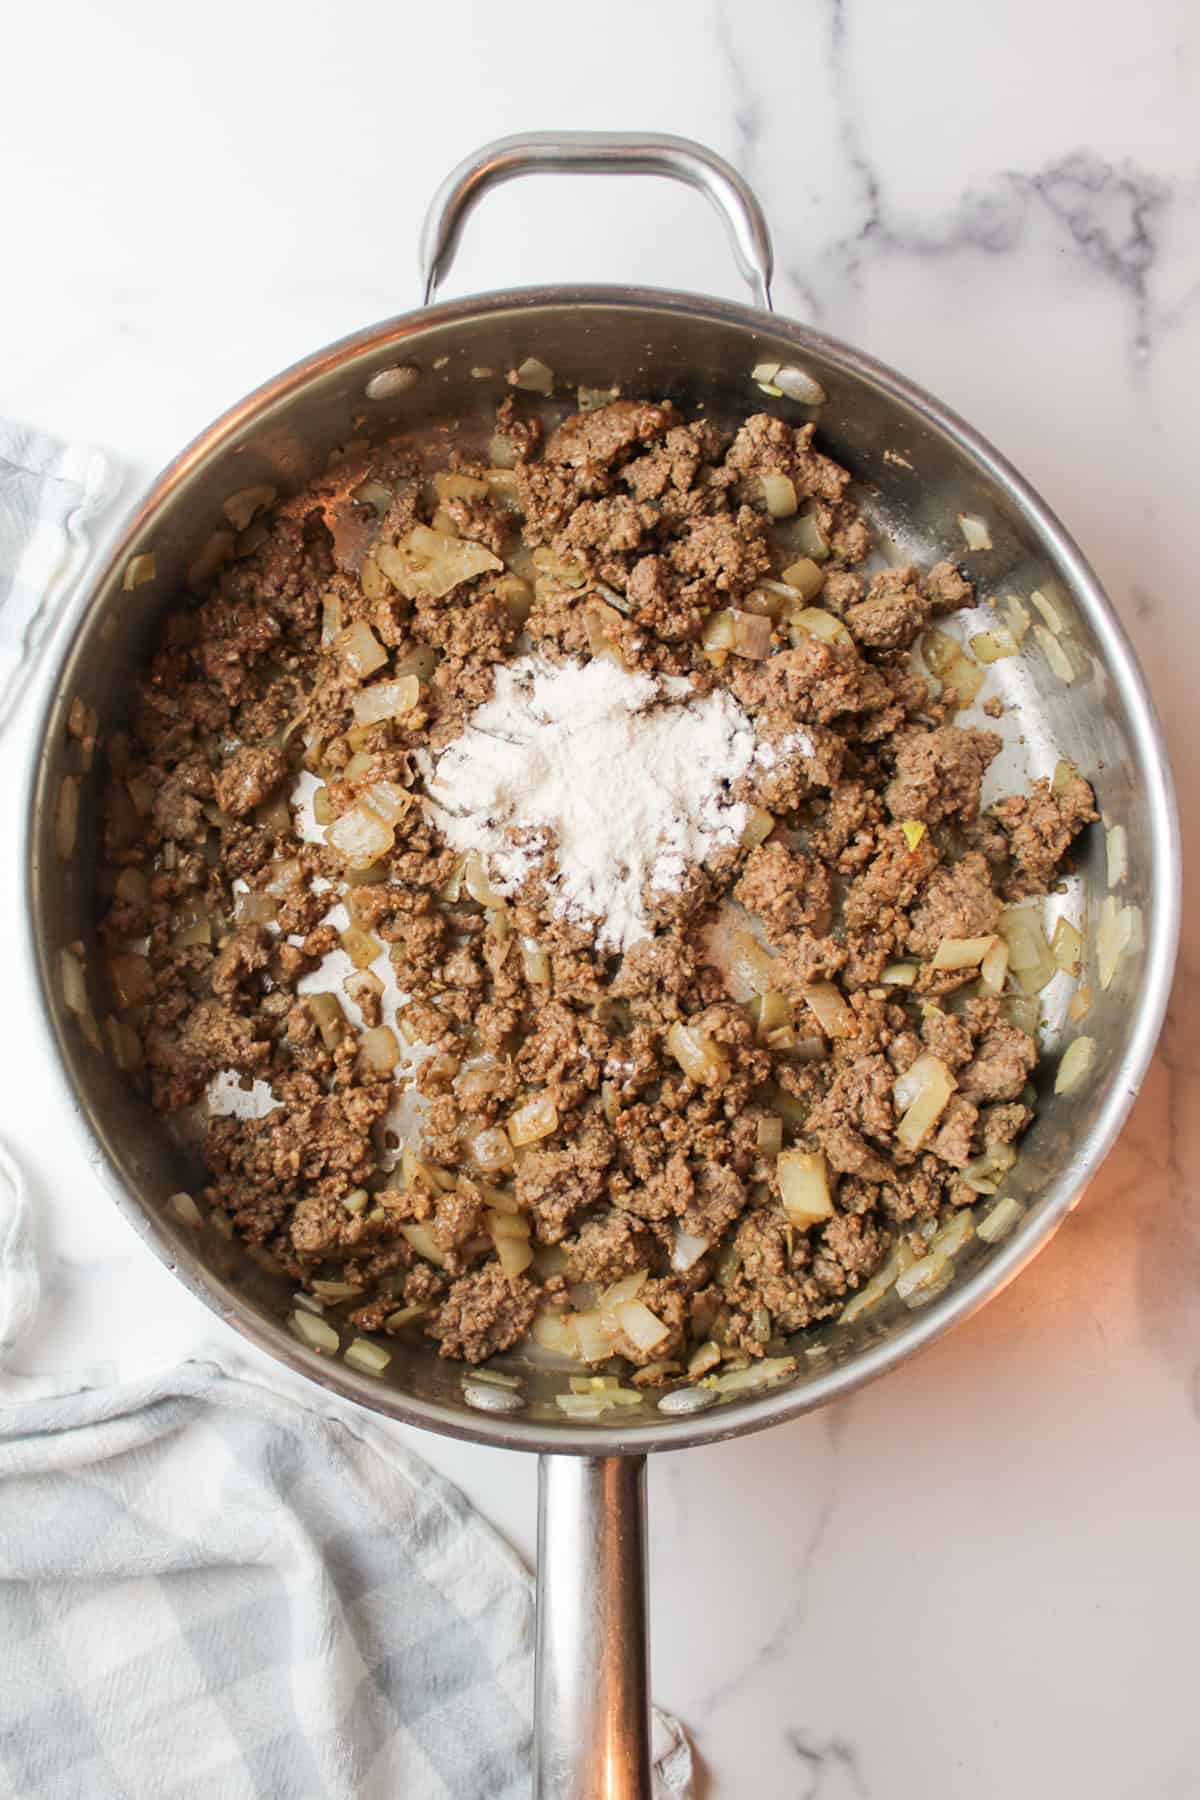 flour added to seasoned ground beef and onion mixture in a skillet